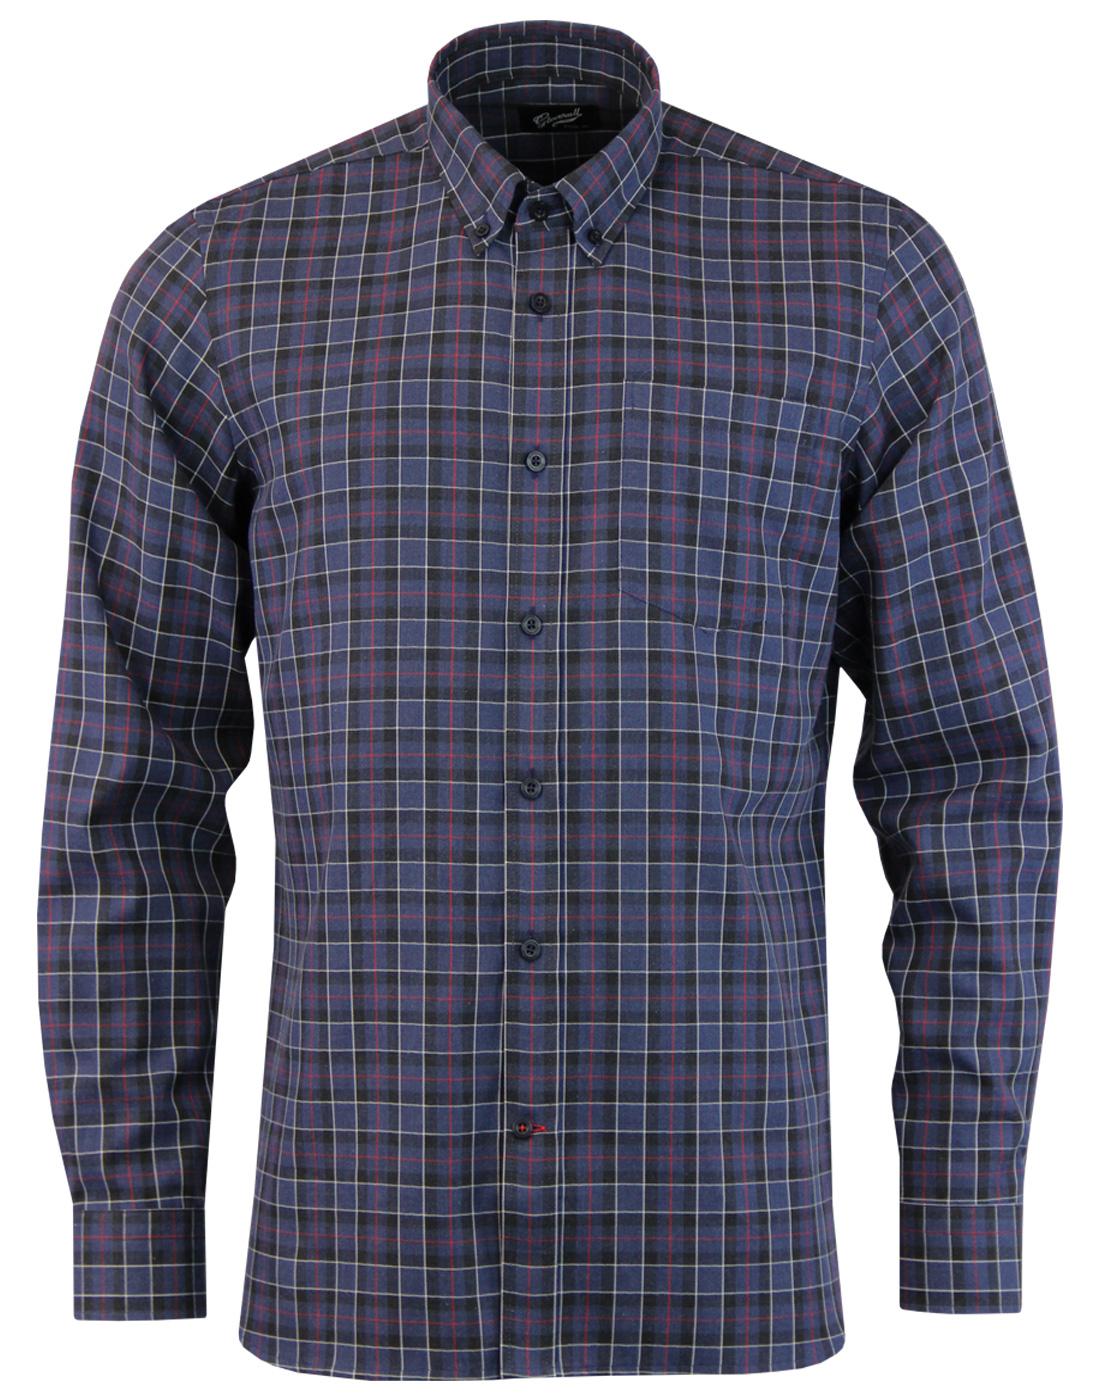 GLOVERALL 60s Mod Button Down Brushed Check Shirt